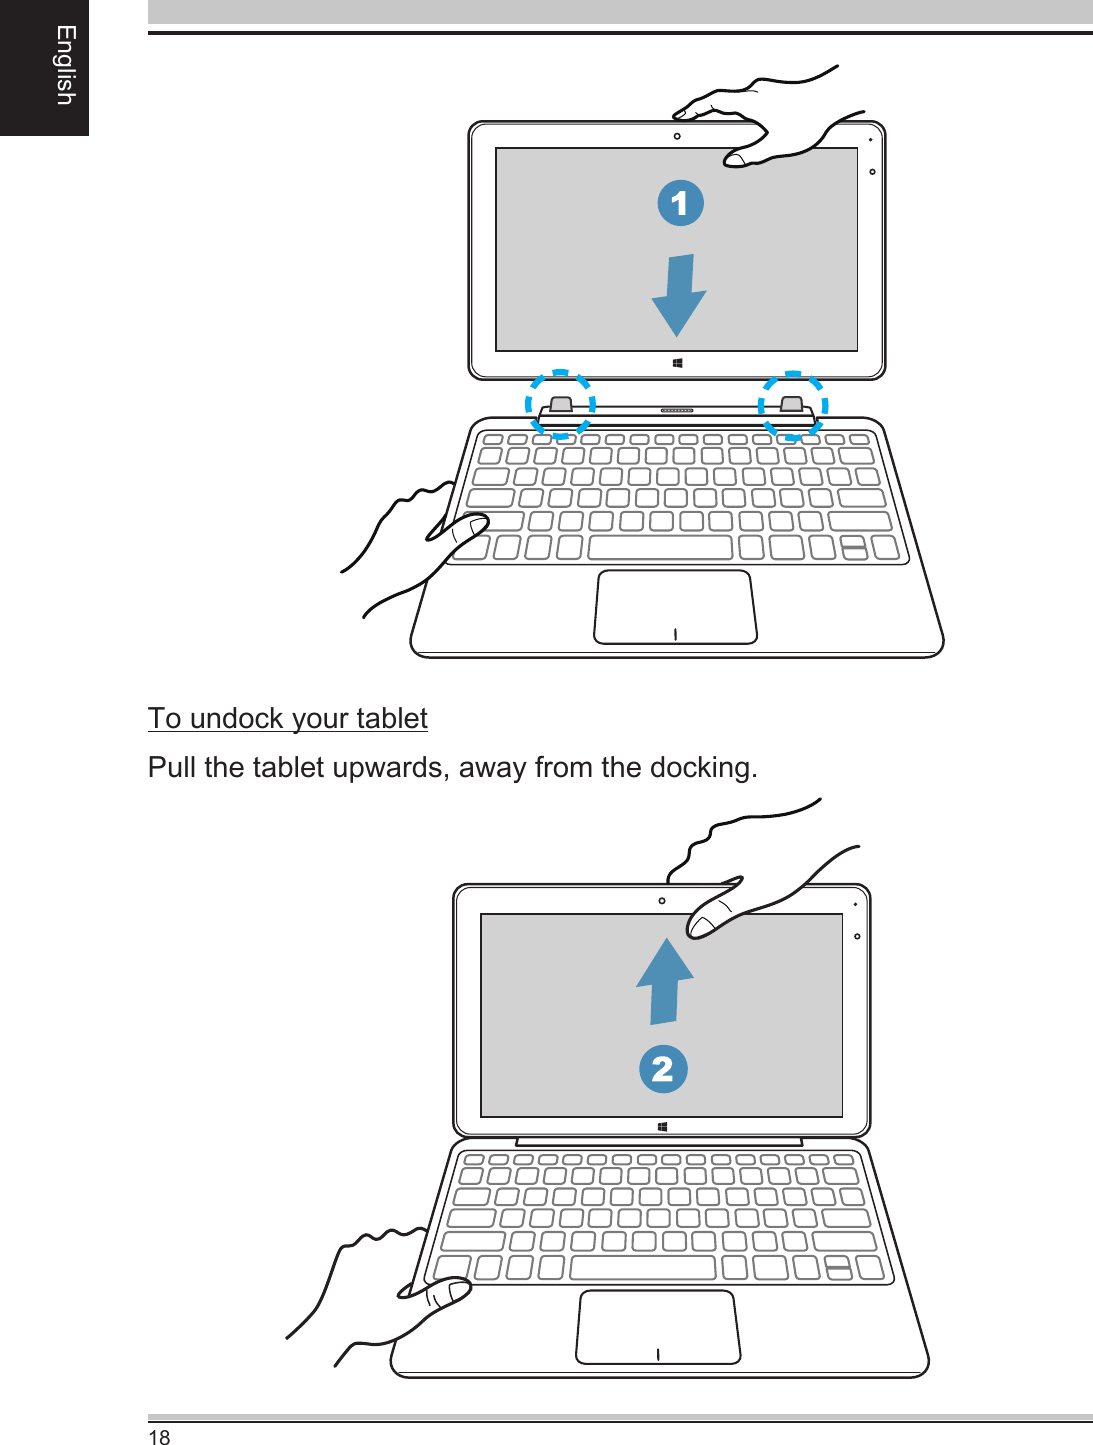 18EnglishTo undock your tabletPull the tablet upwards, away from the docking.